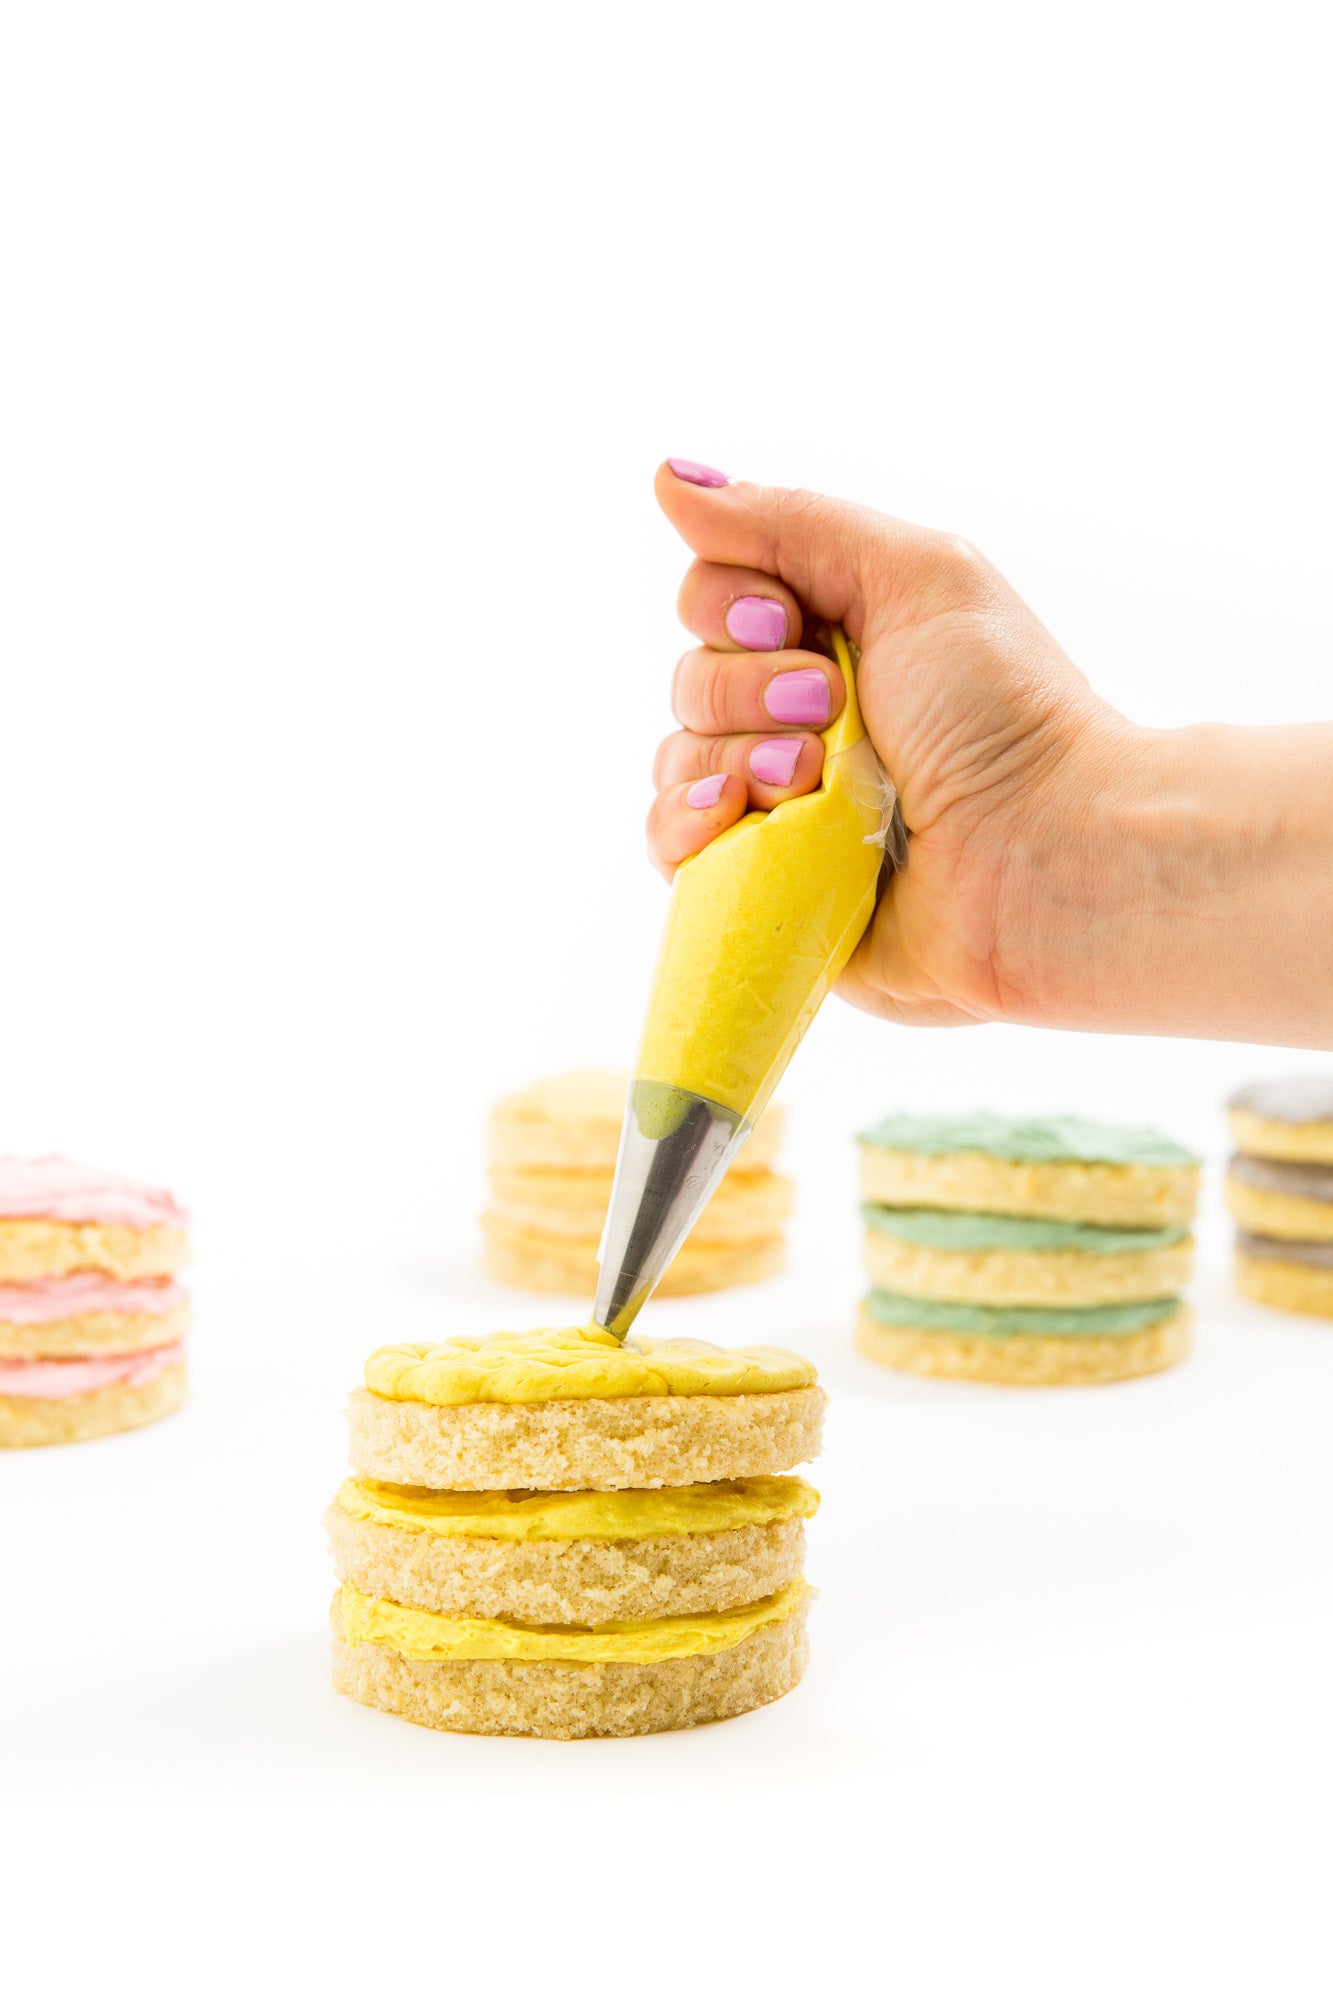 Image from the side of a hand frosting a yellow Miss Jones Baking Co Rainbow Cakelet